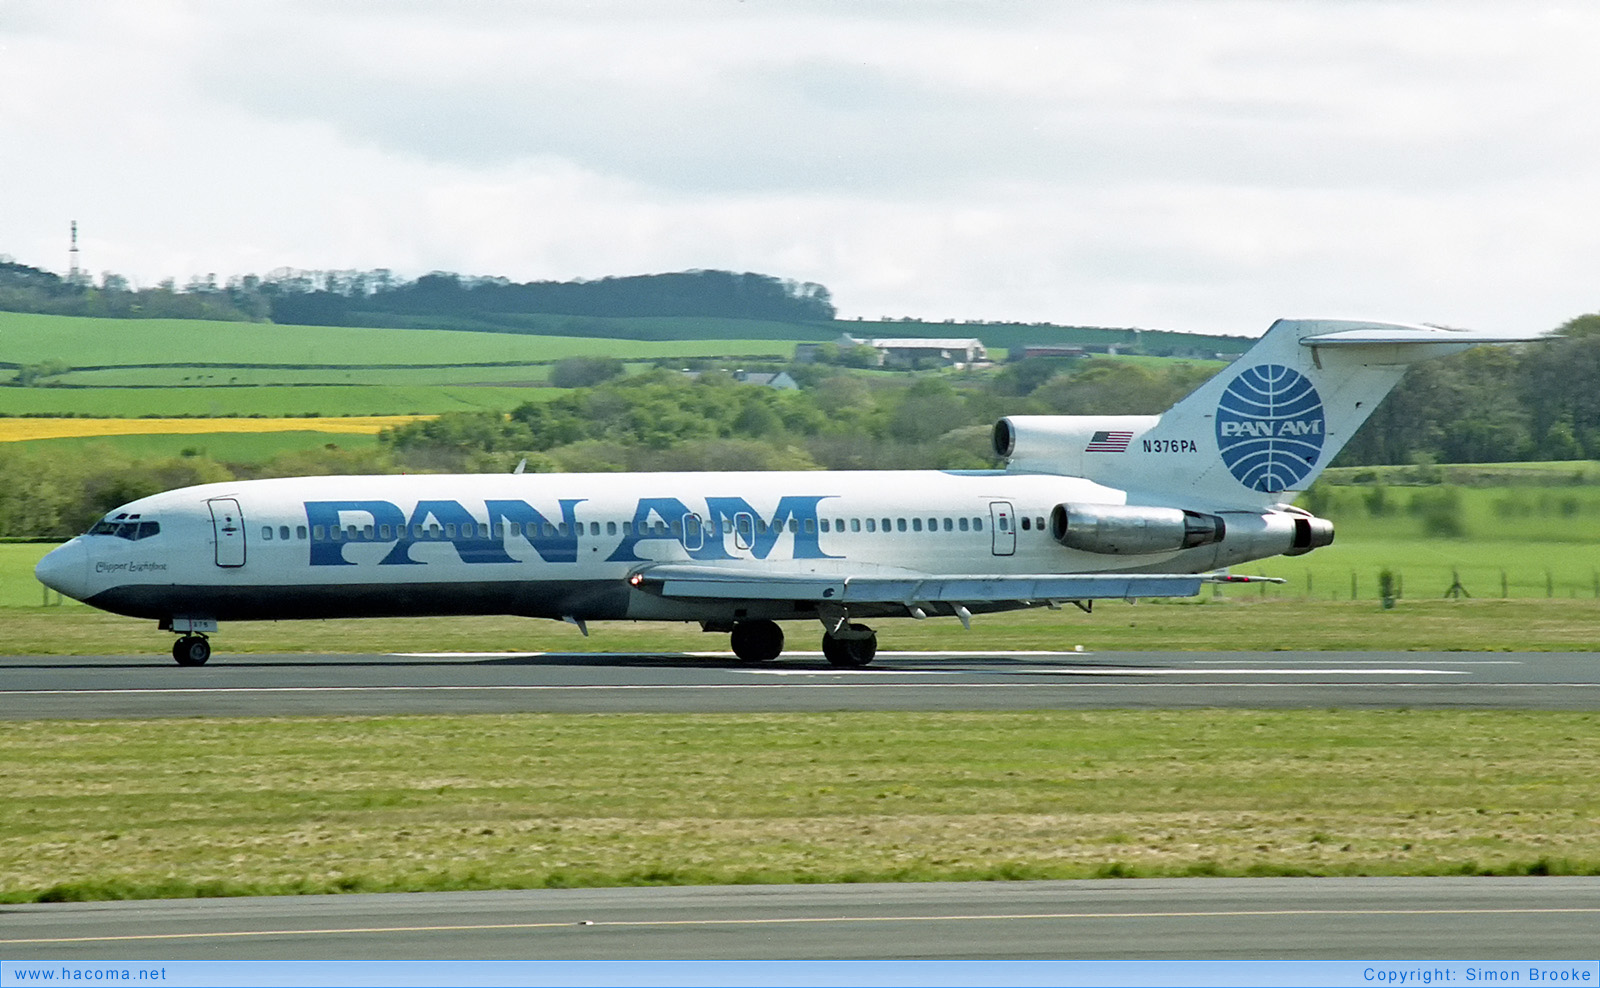 Photo of N376PA - Pan Am Clipper Lightfoot - Glasgow Prestwick Airport - May 1991